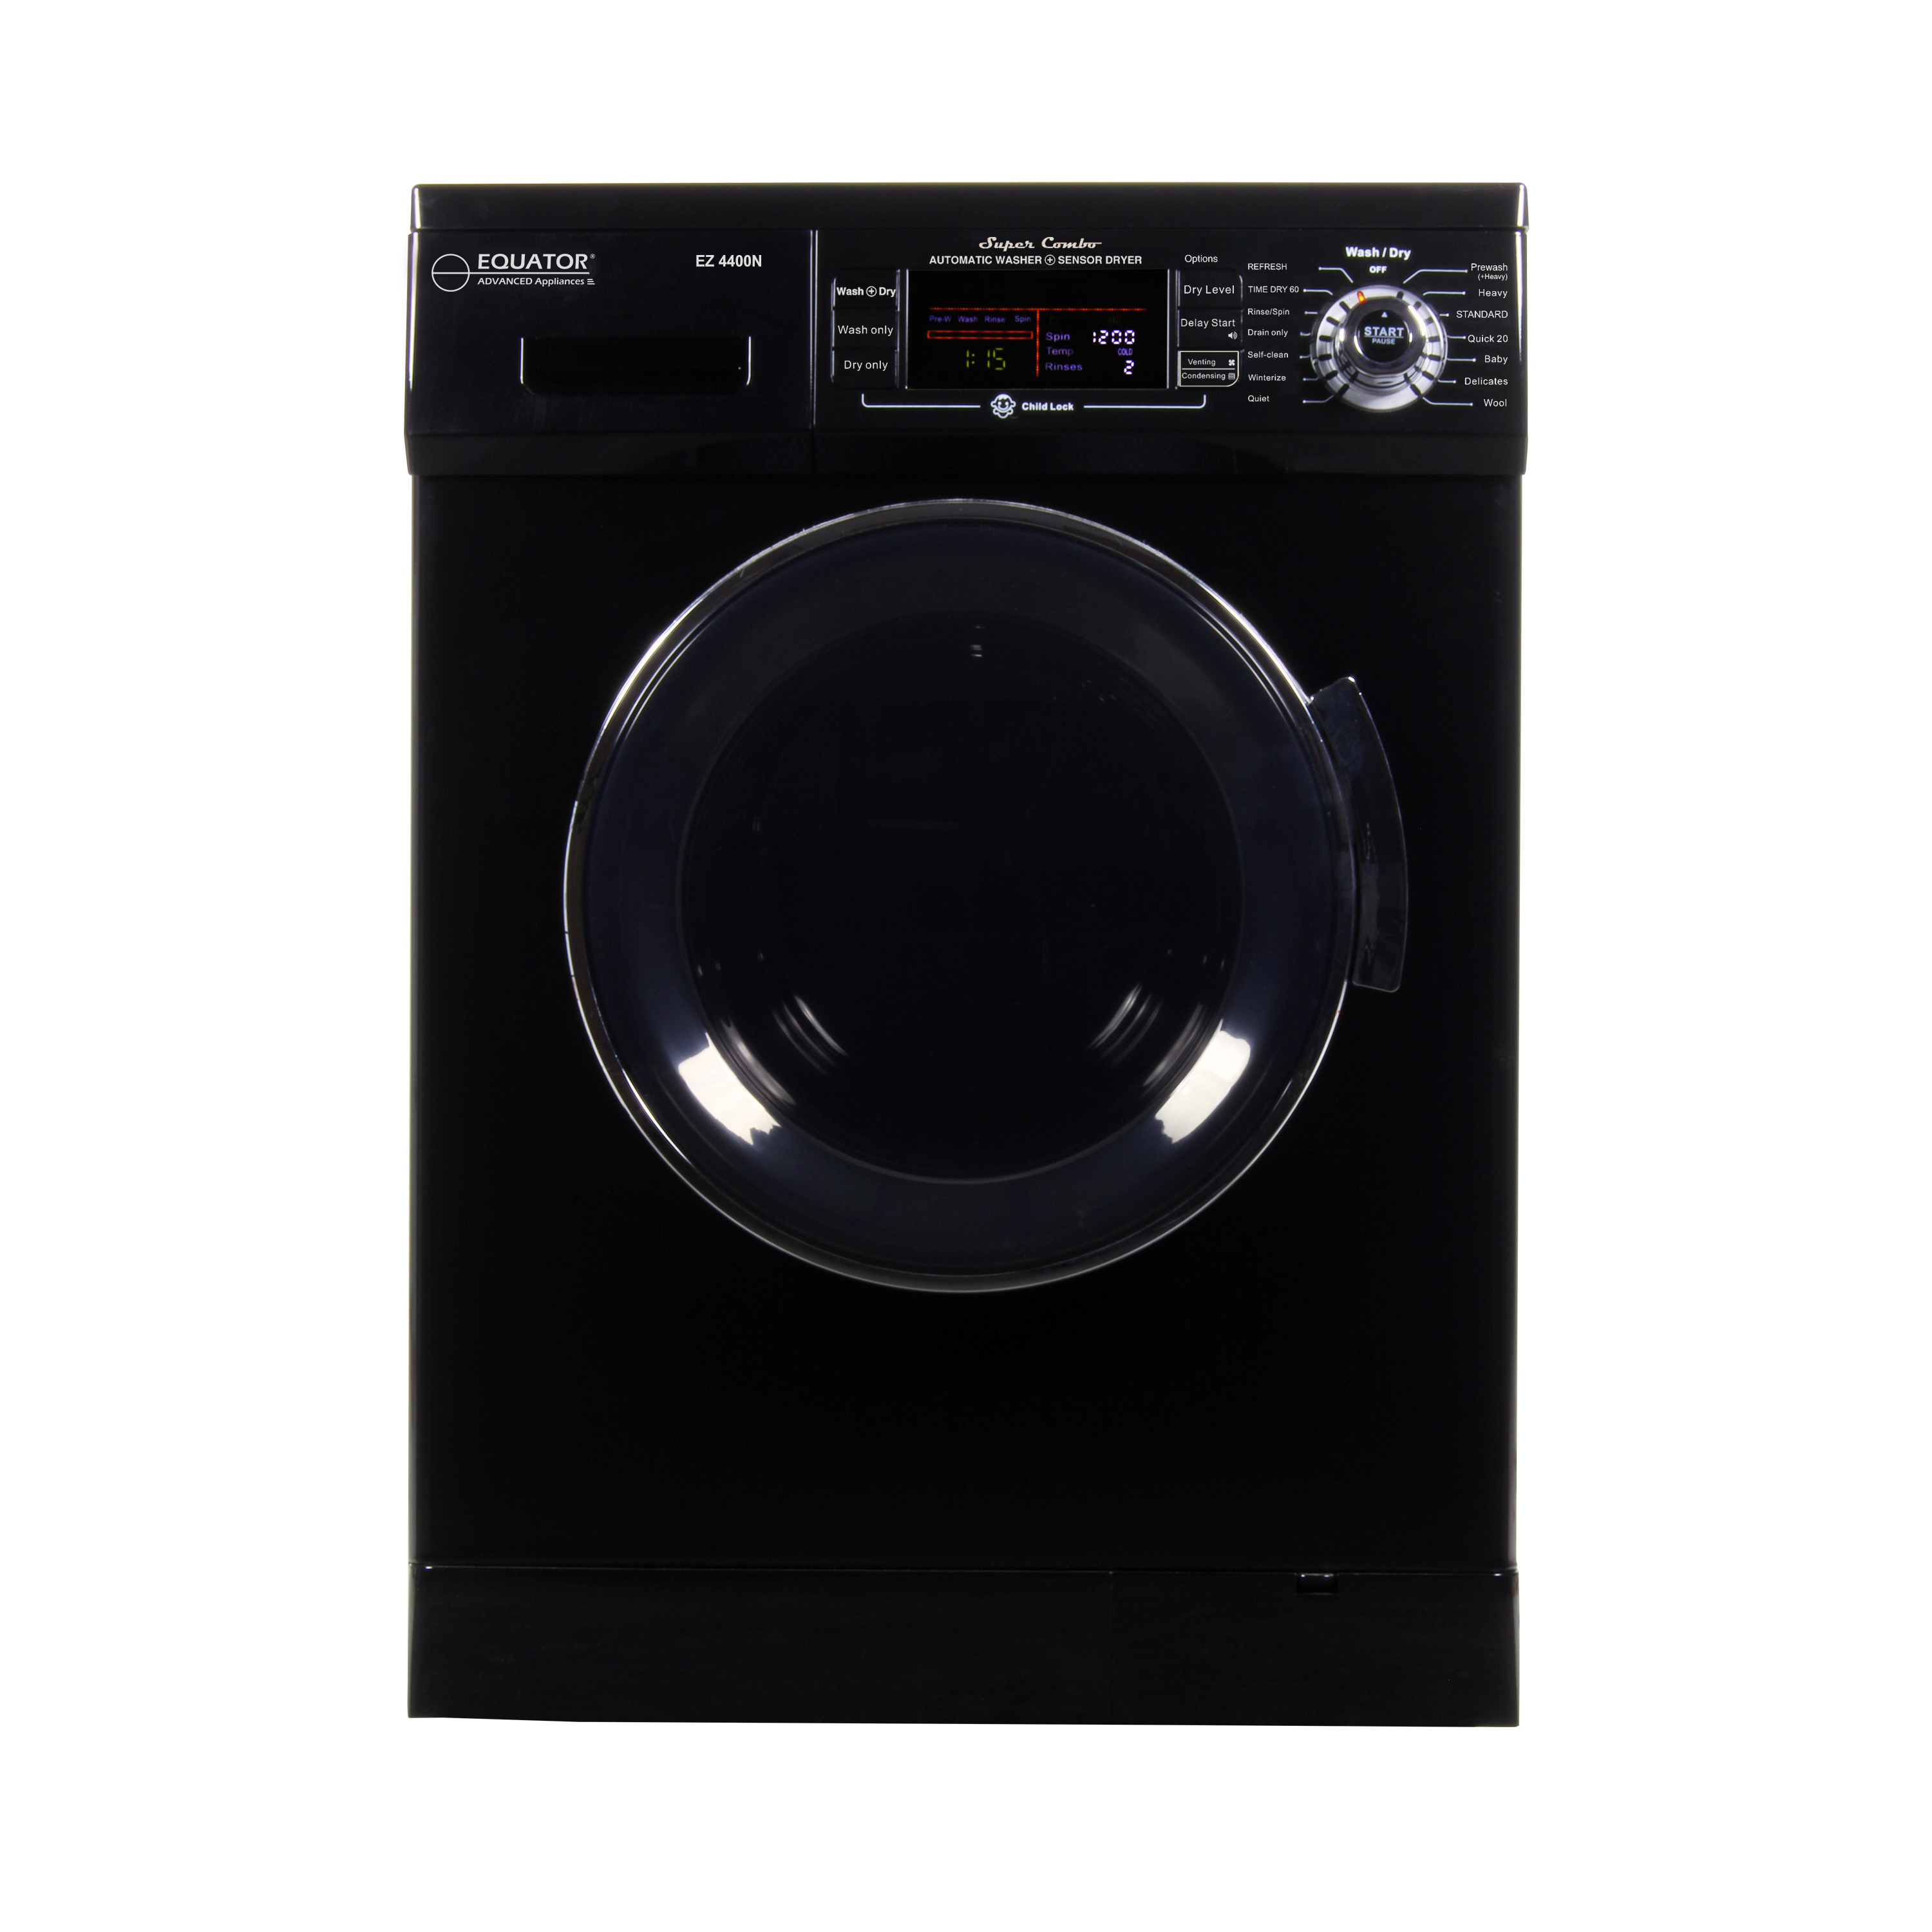 Equator Version 2 Pro Compact 13 lbs Combination Washer DryerVented/Ventless Dry, Winterize, Quiet, Easy to Use Controls (Black)